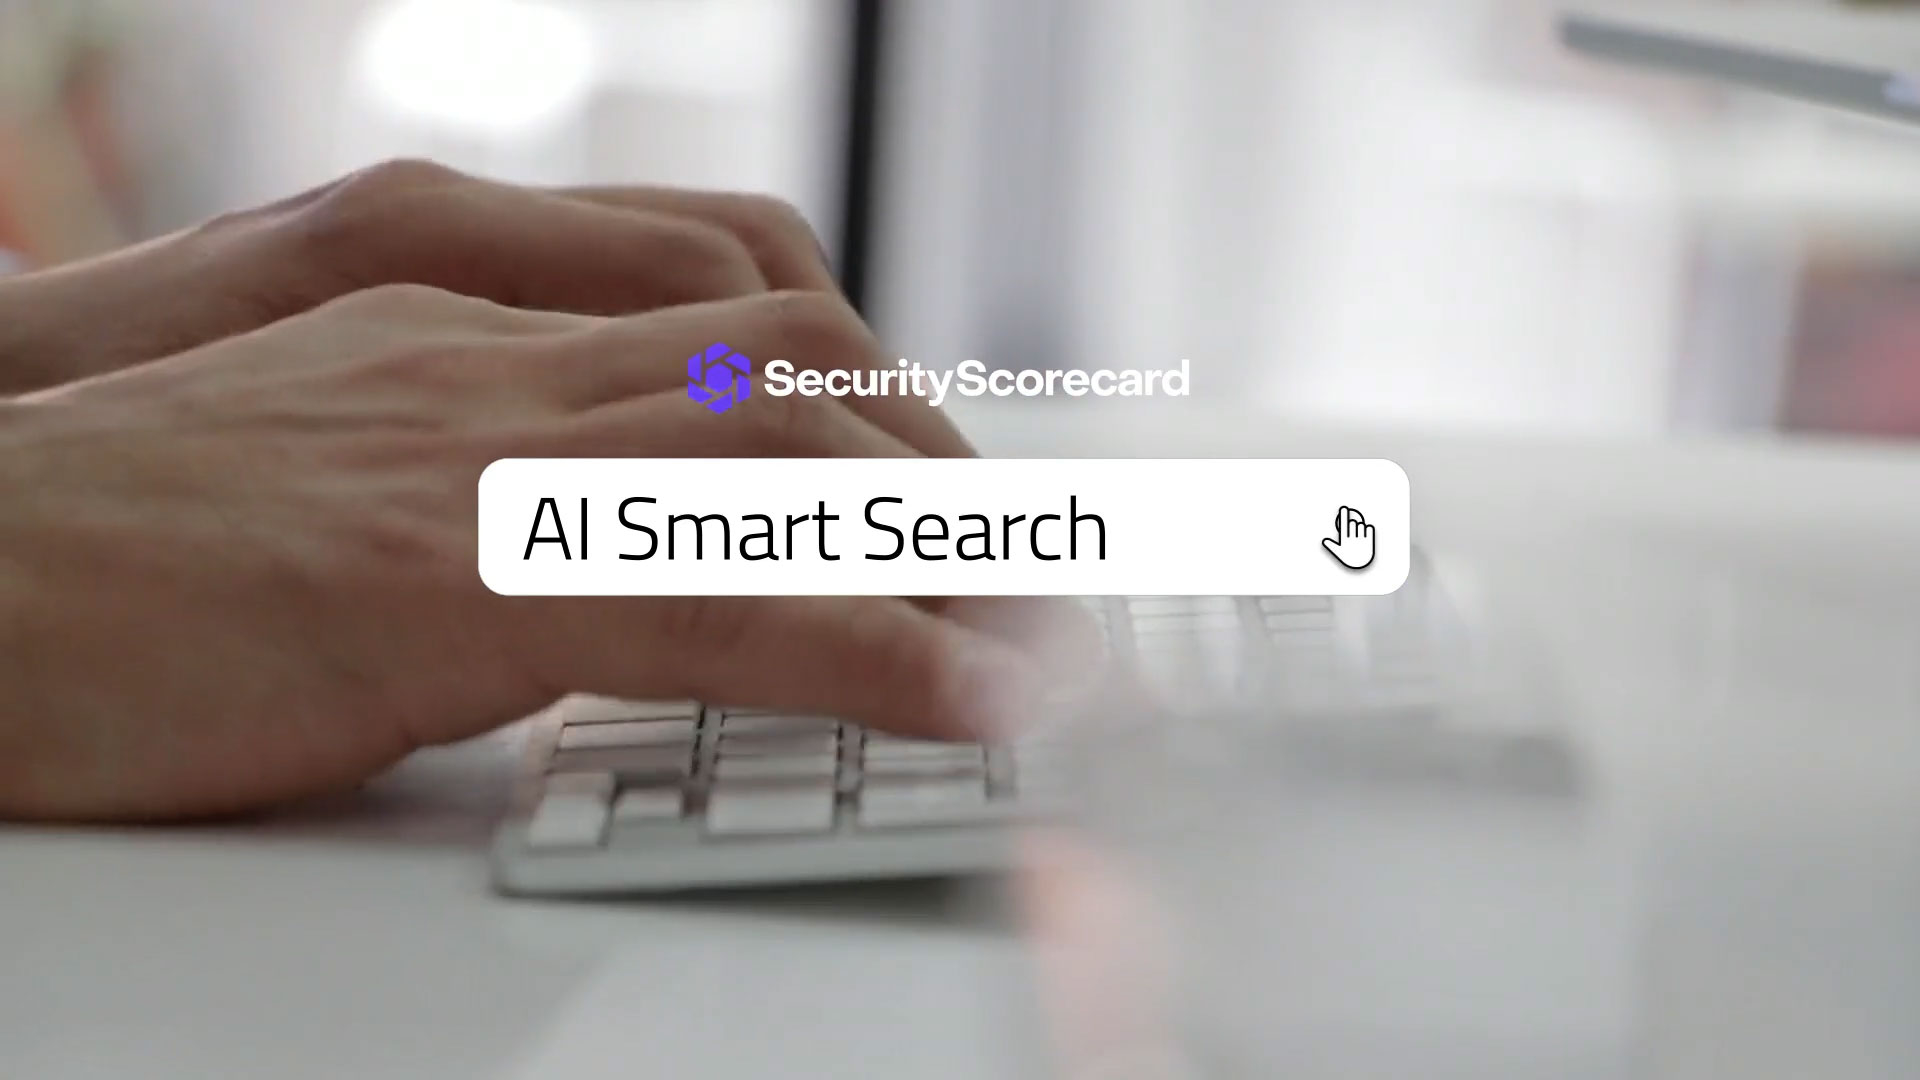 Start searching today. Open a free account at SecurityScorecard.com.